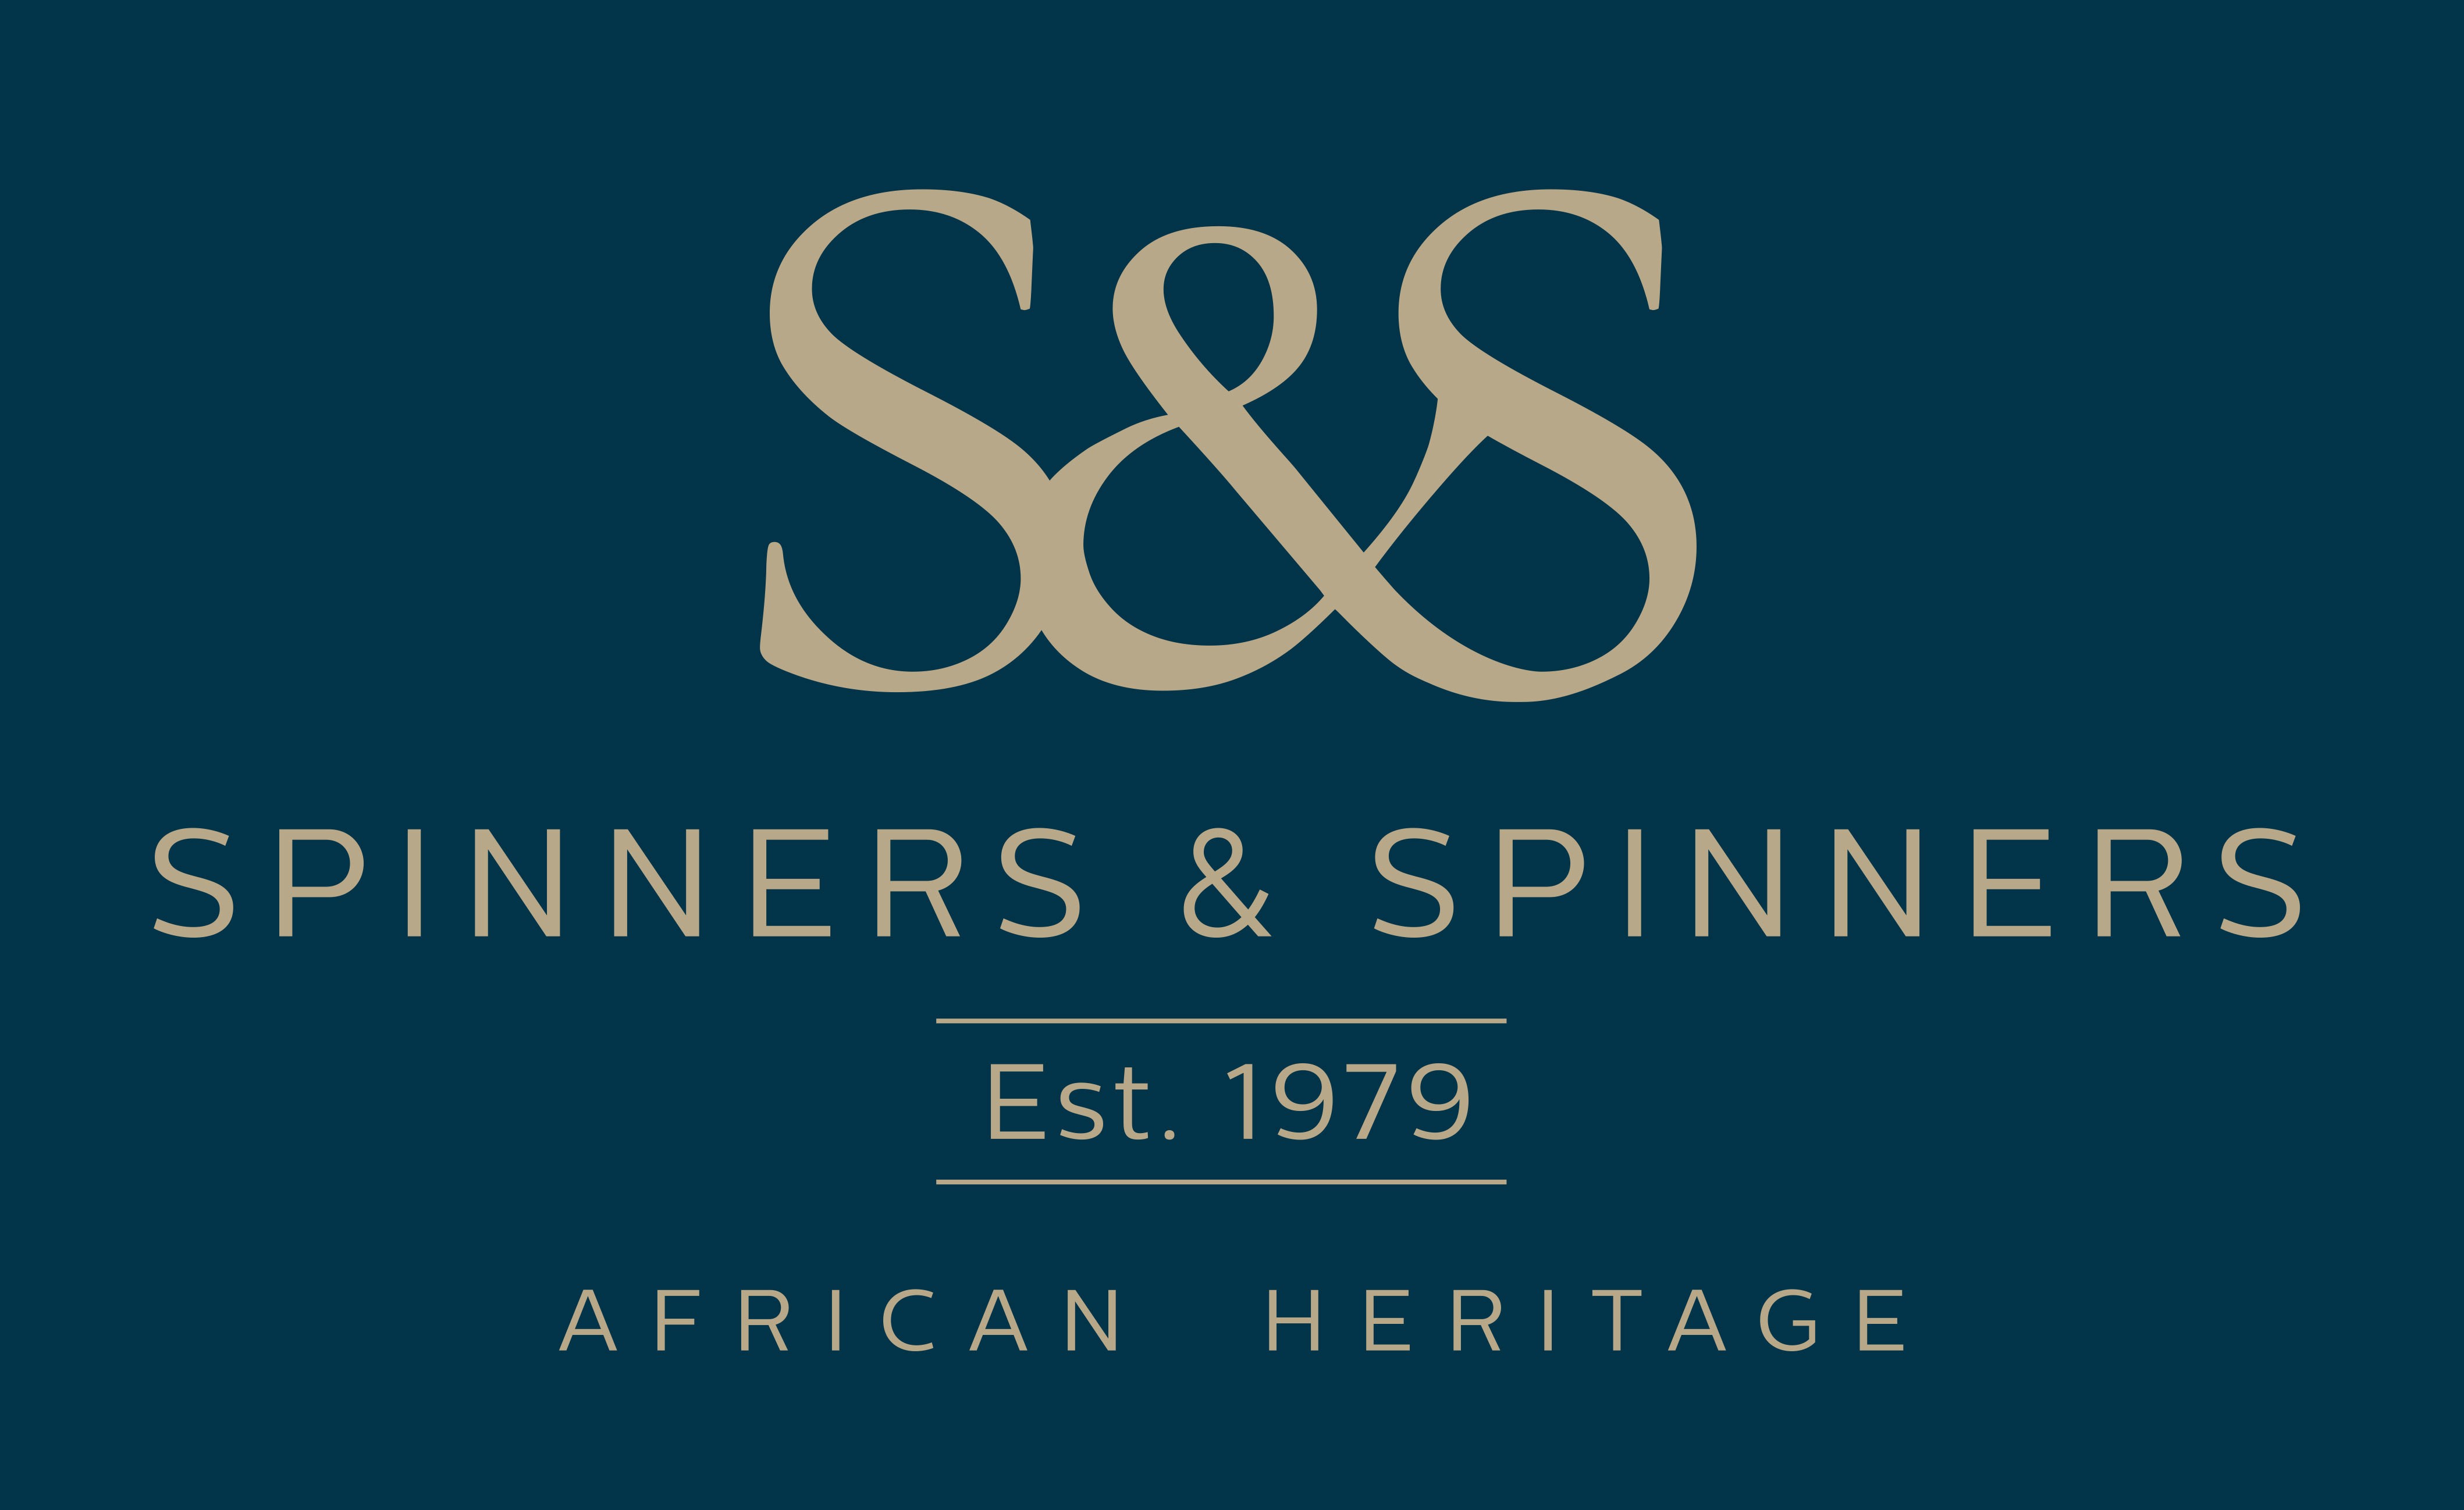 Spinners and Spinners Ltd (S&S)